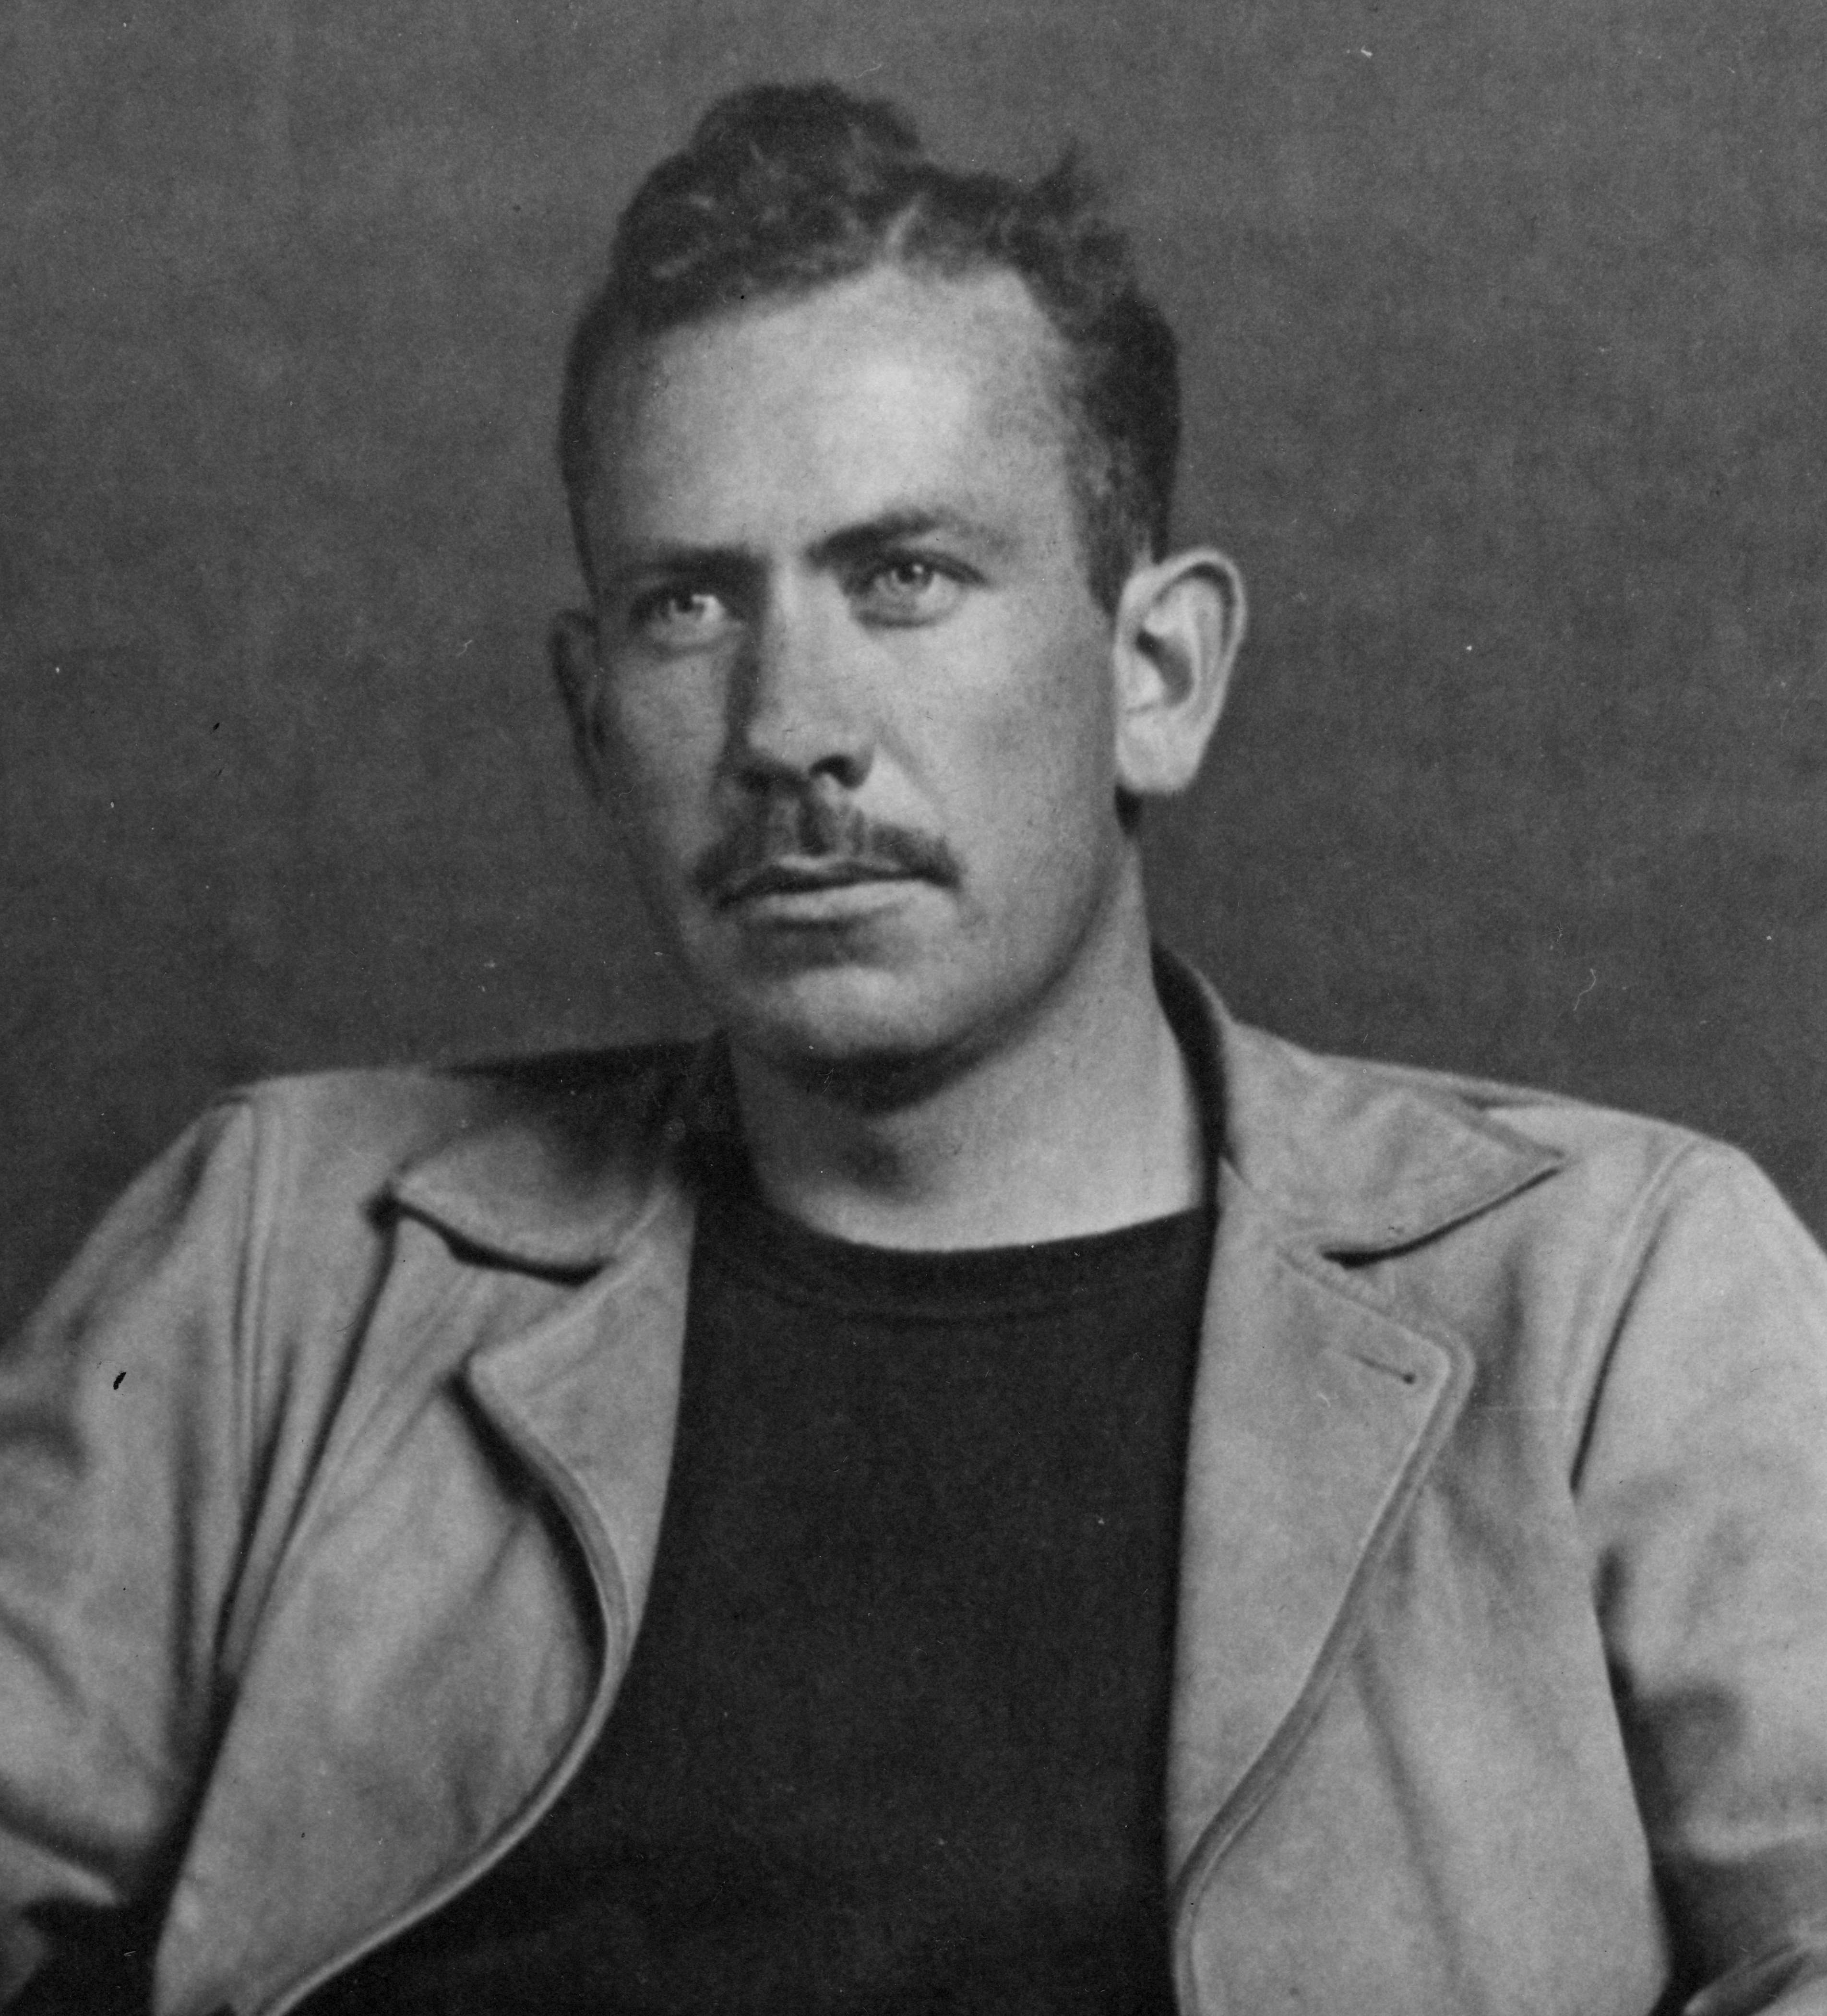 Headshot of a young John Steinbeck with a mustache and serious expression.